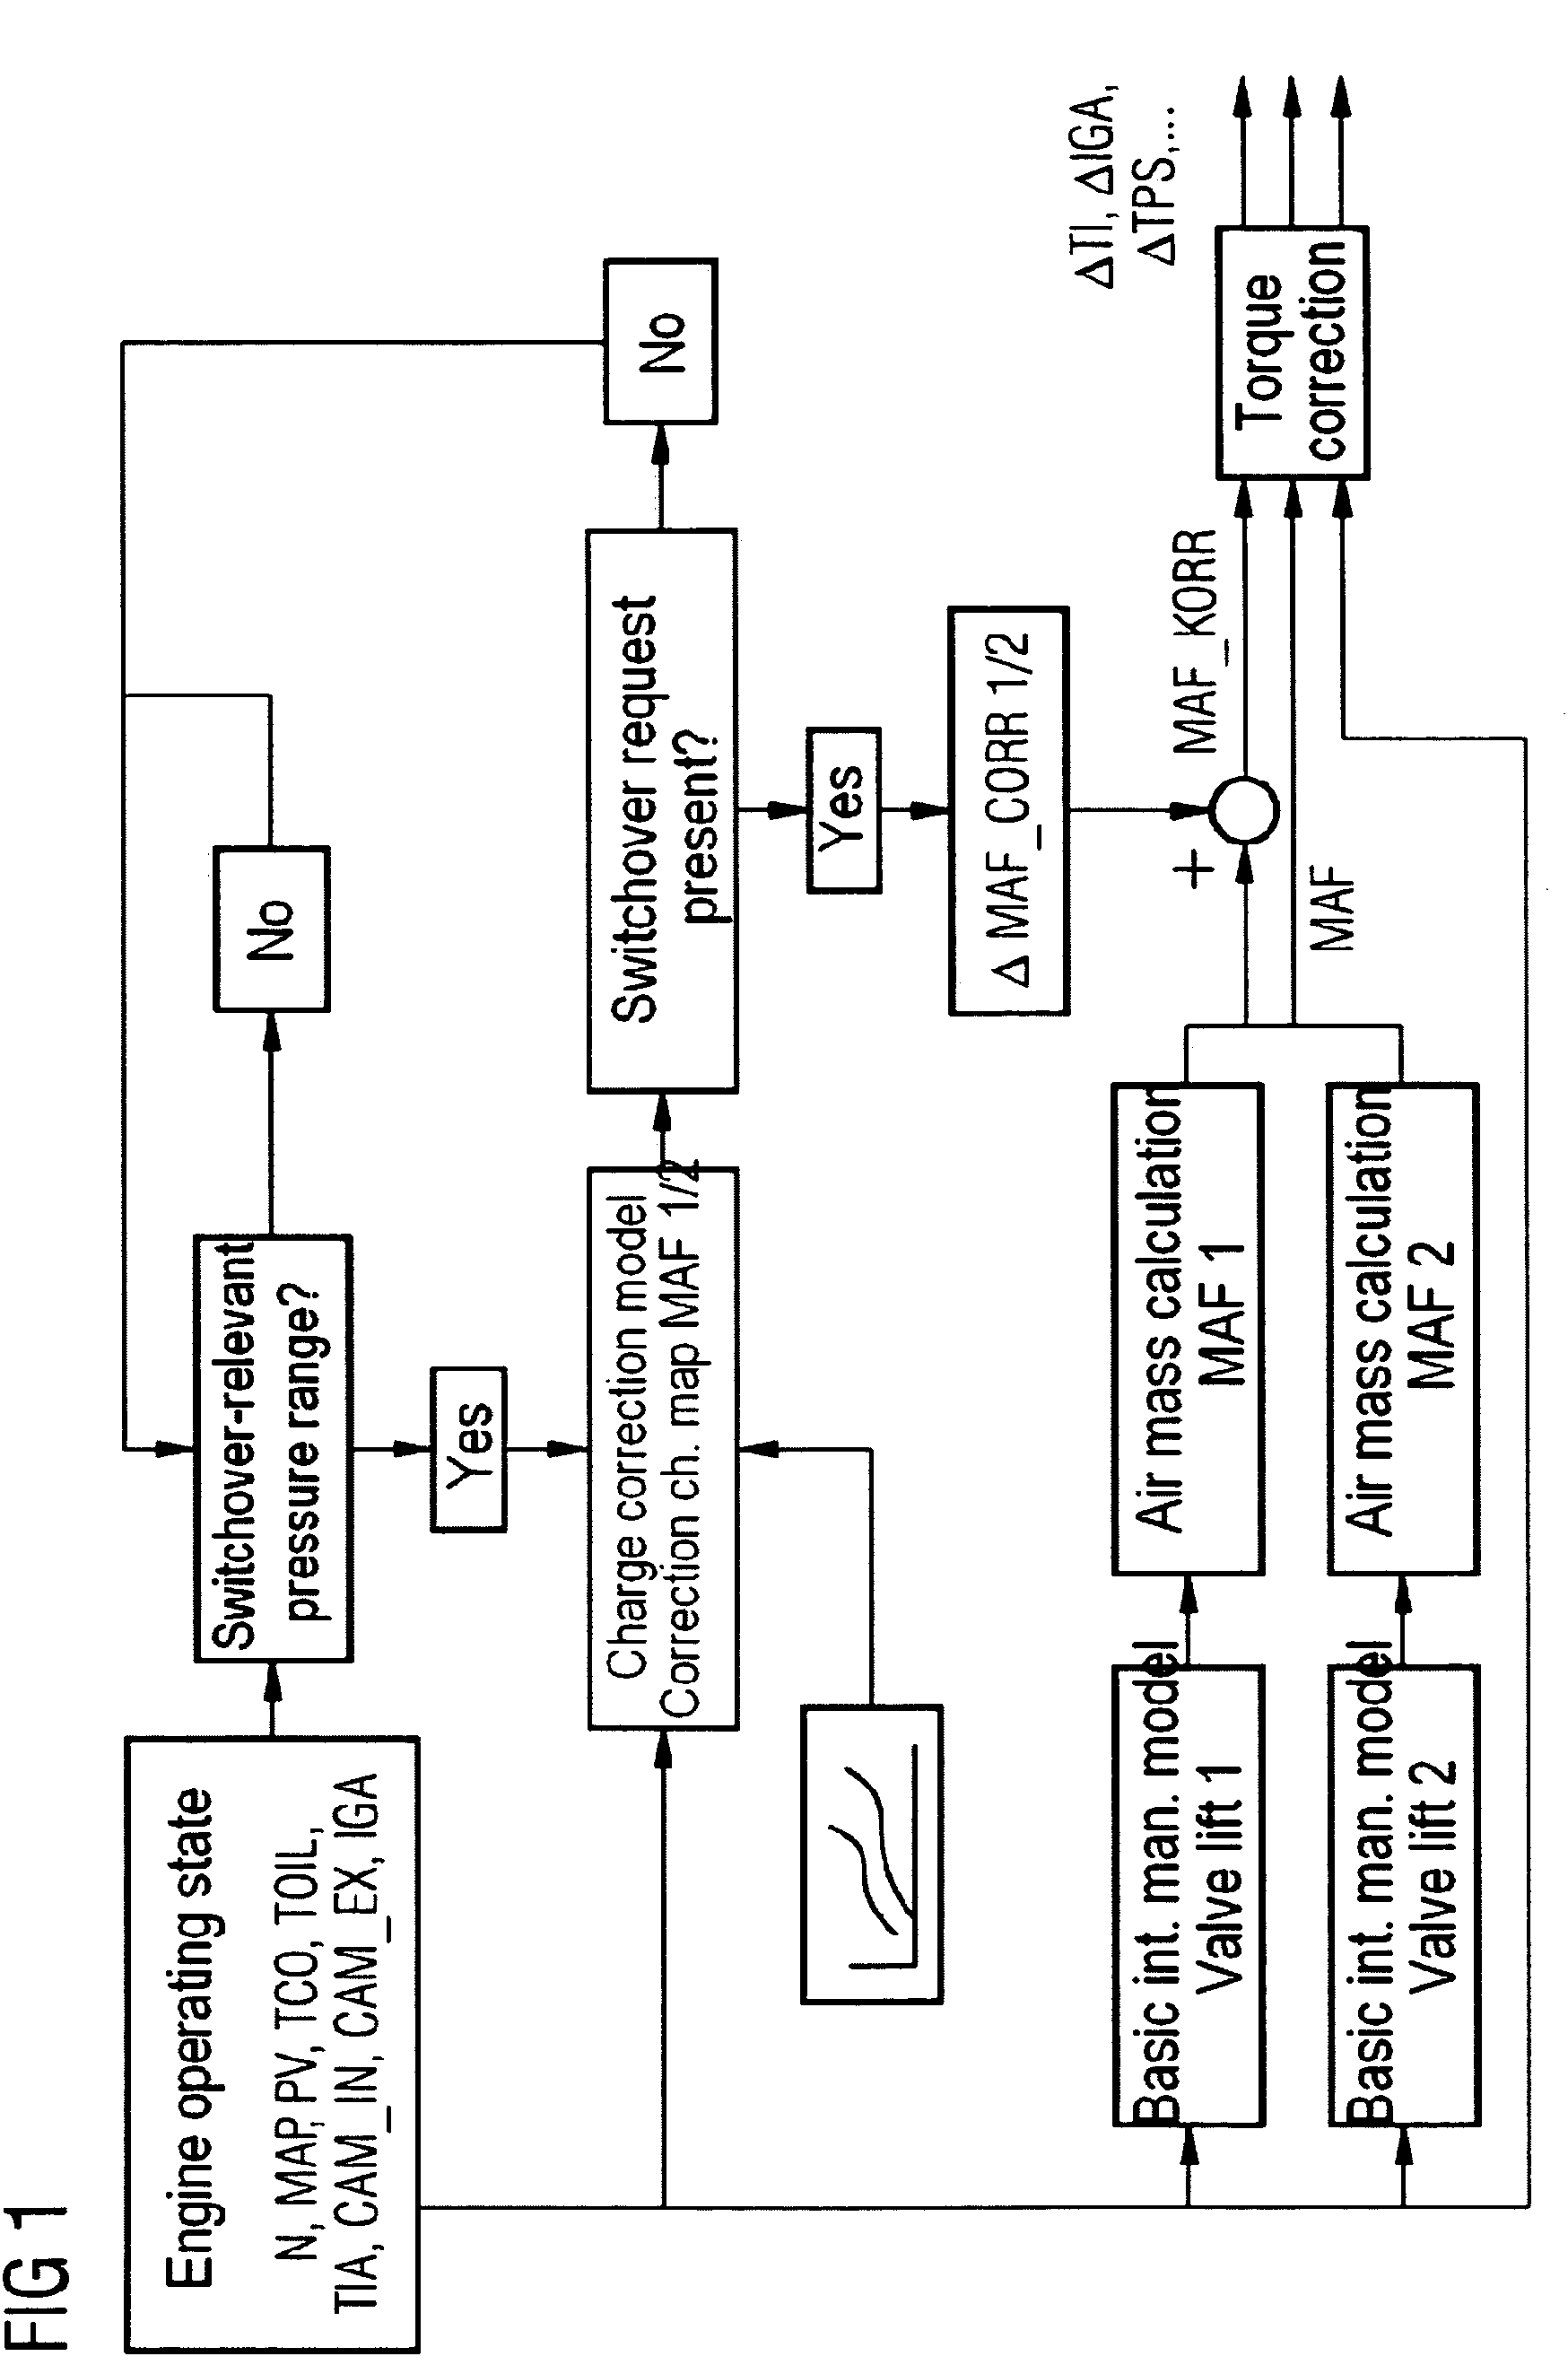 Method for controlling an internal combustion engine using valve lift switchover